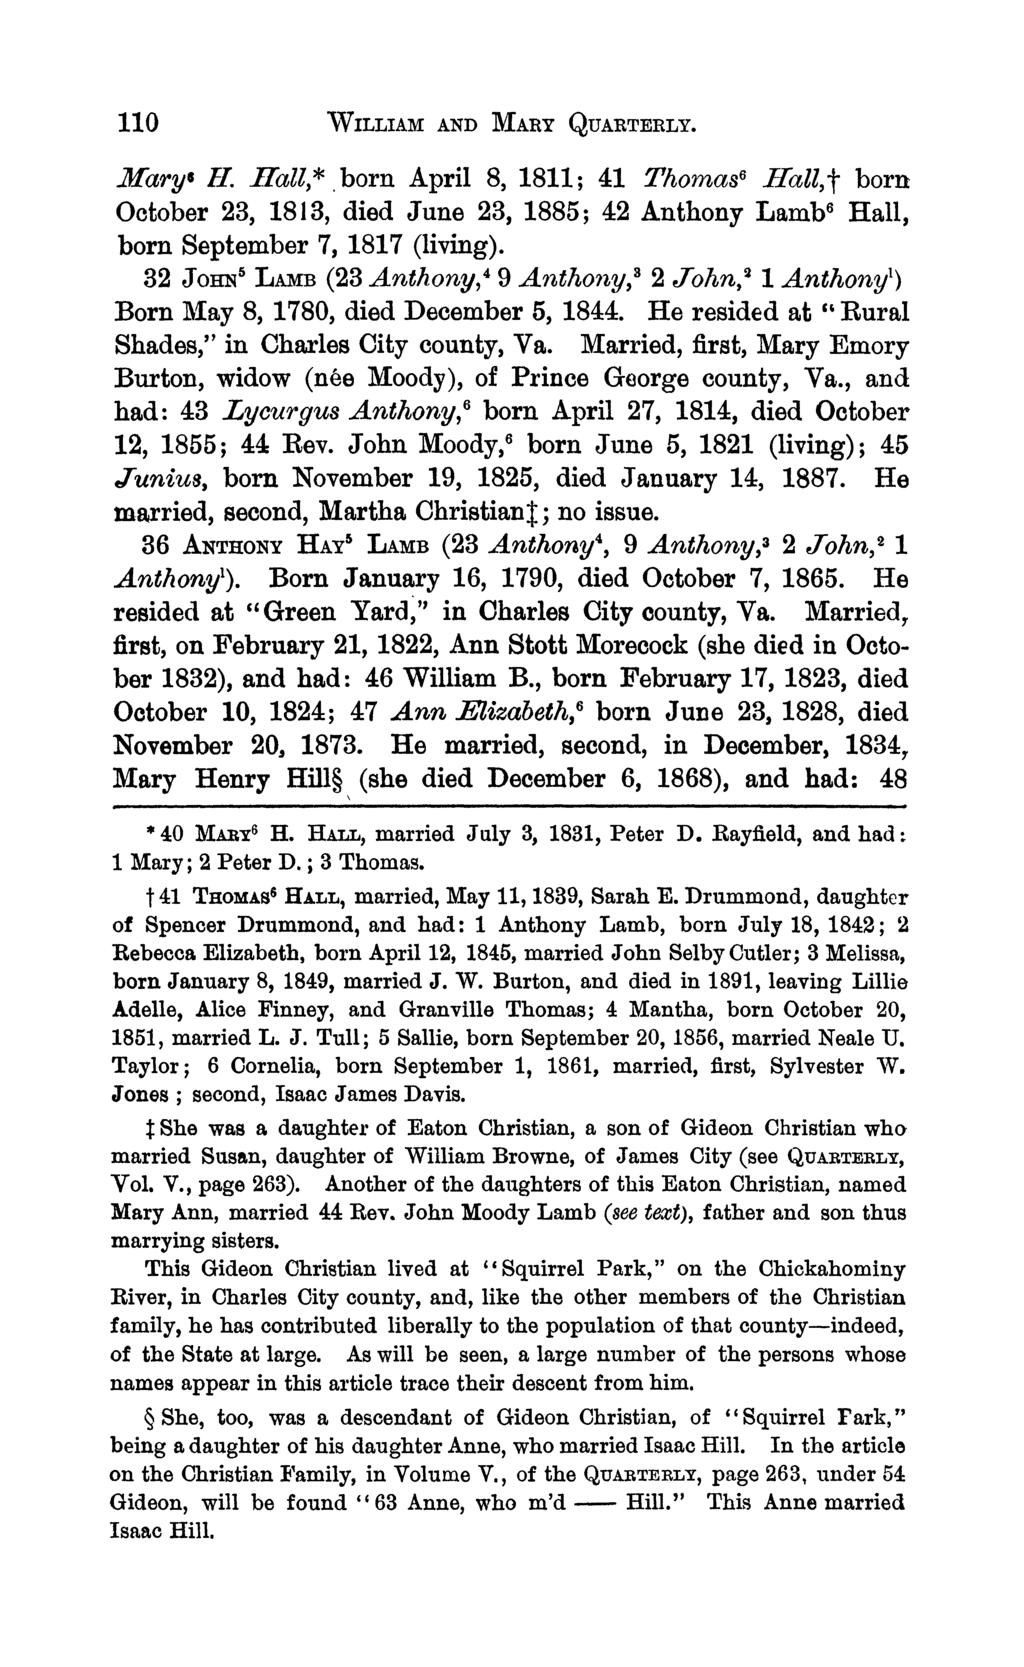 110 WILLIAM AND MARY QUARTERLY. Marys ii. Hal4,* born April 8, 1811; 41 Thomas6 Hcalt born October 23, 1813, died June 23, 1885; 42 Anthony Lamb6 Hall, born September 7, 1817 (living).